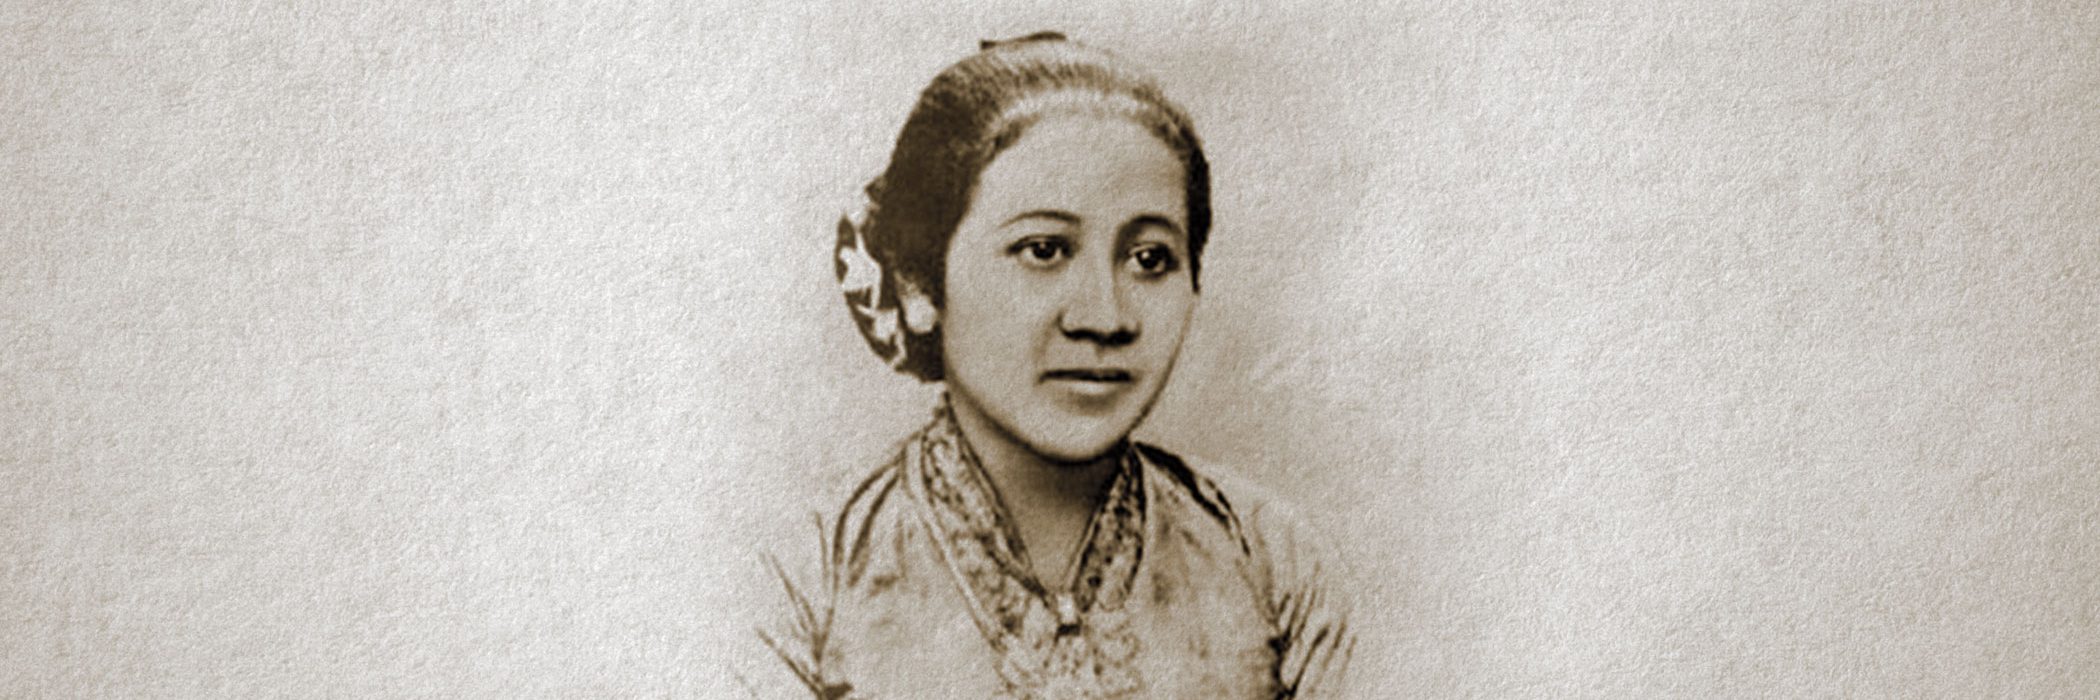 Raffles Bali - R.A Kartini: Pioneering Women’s Rights and Education in Colonial Indonesia